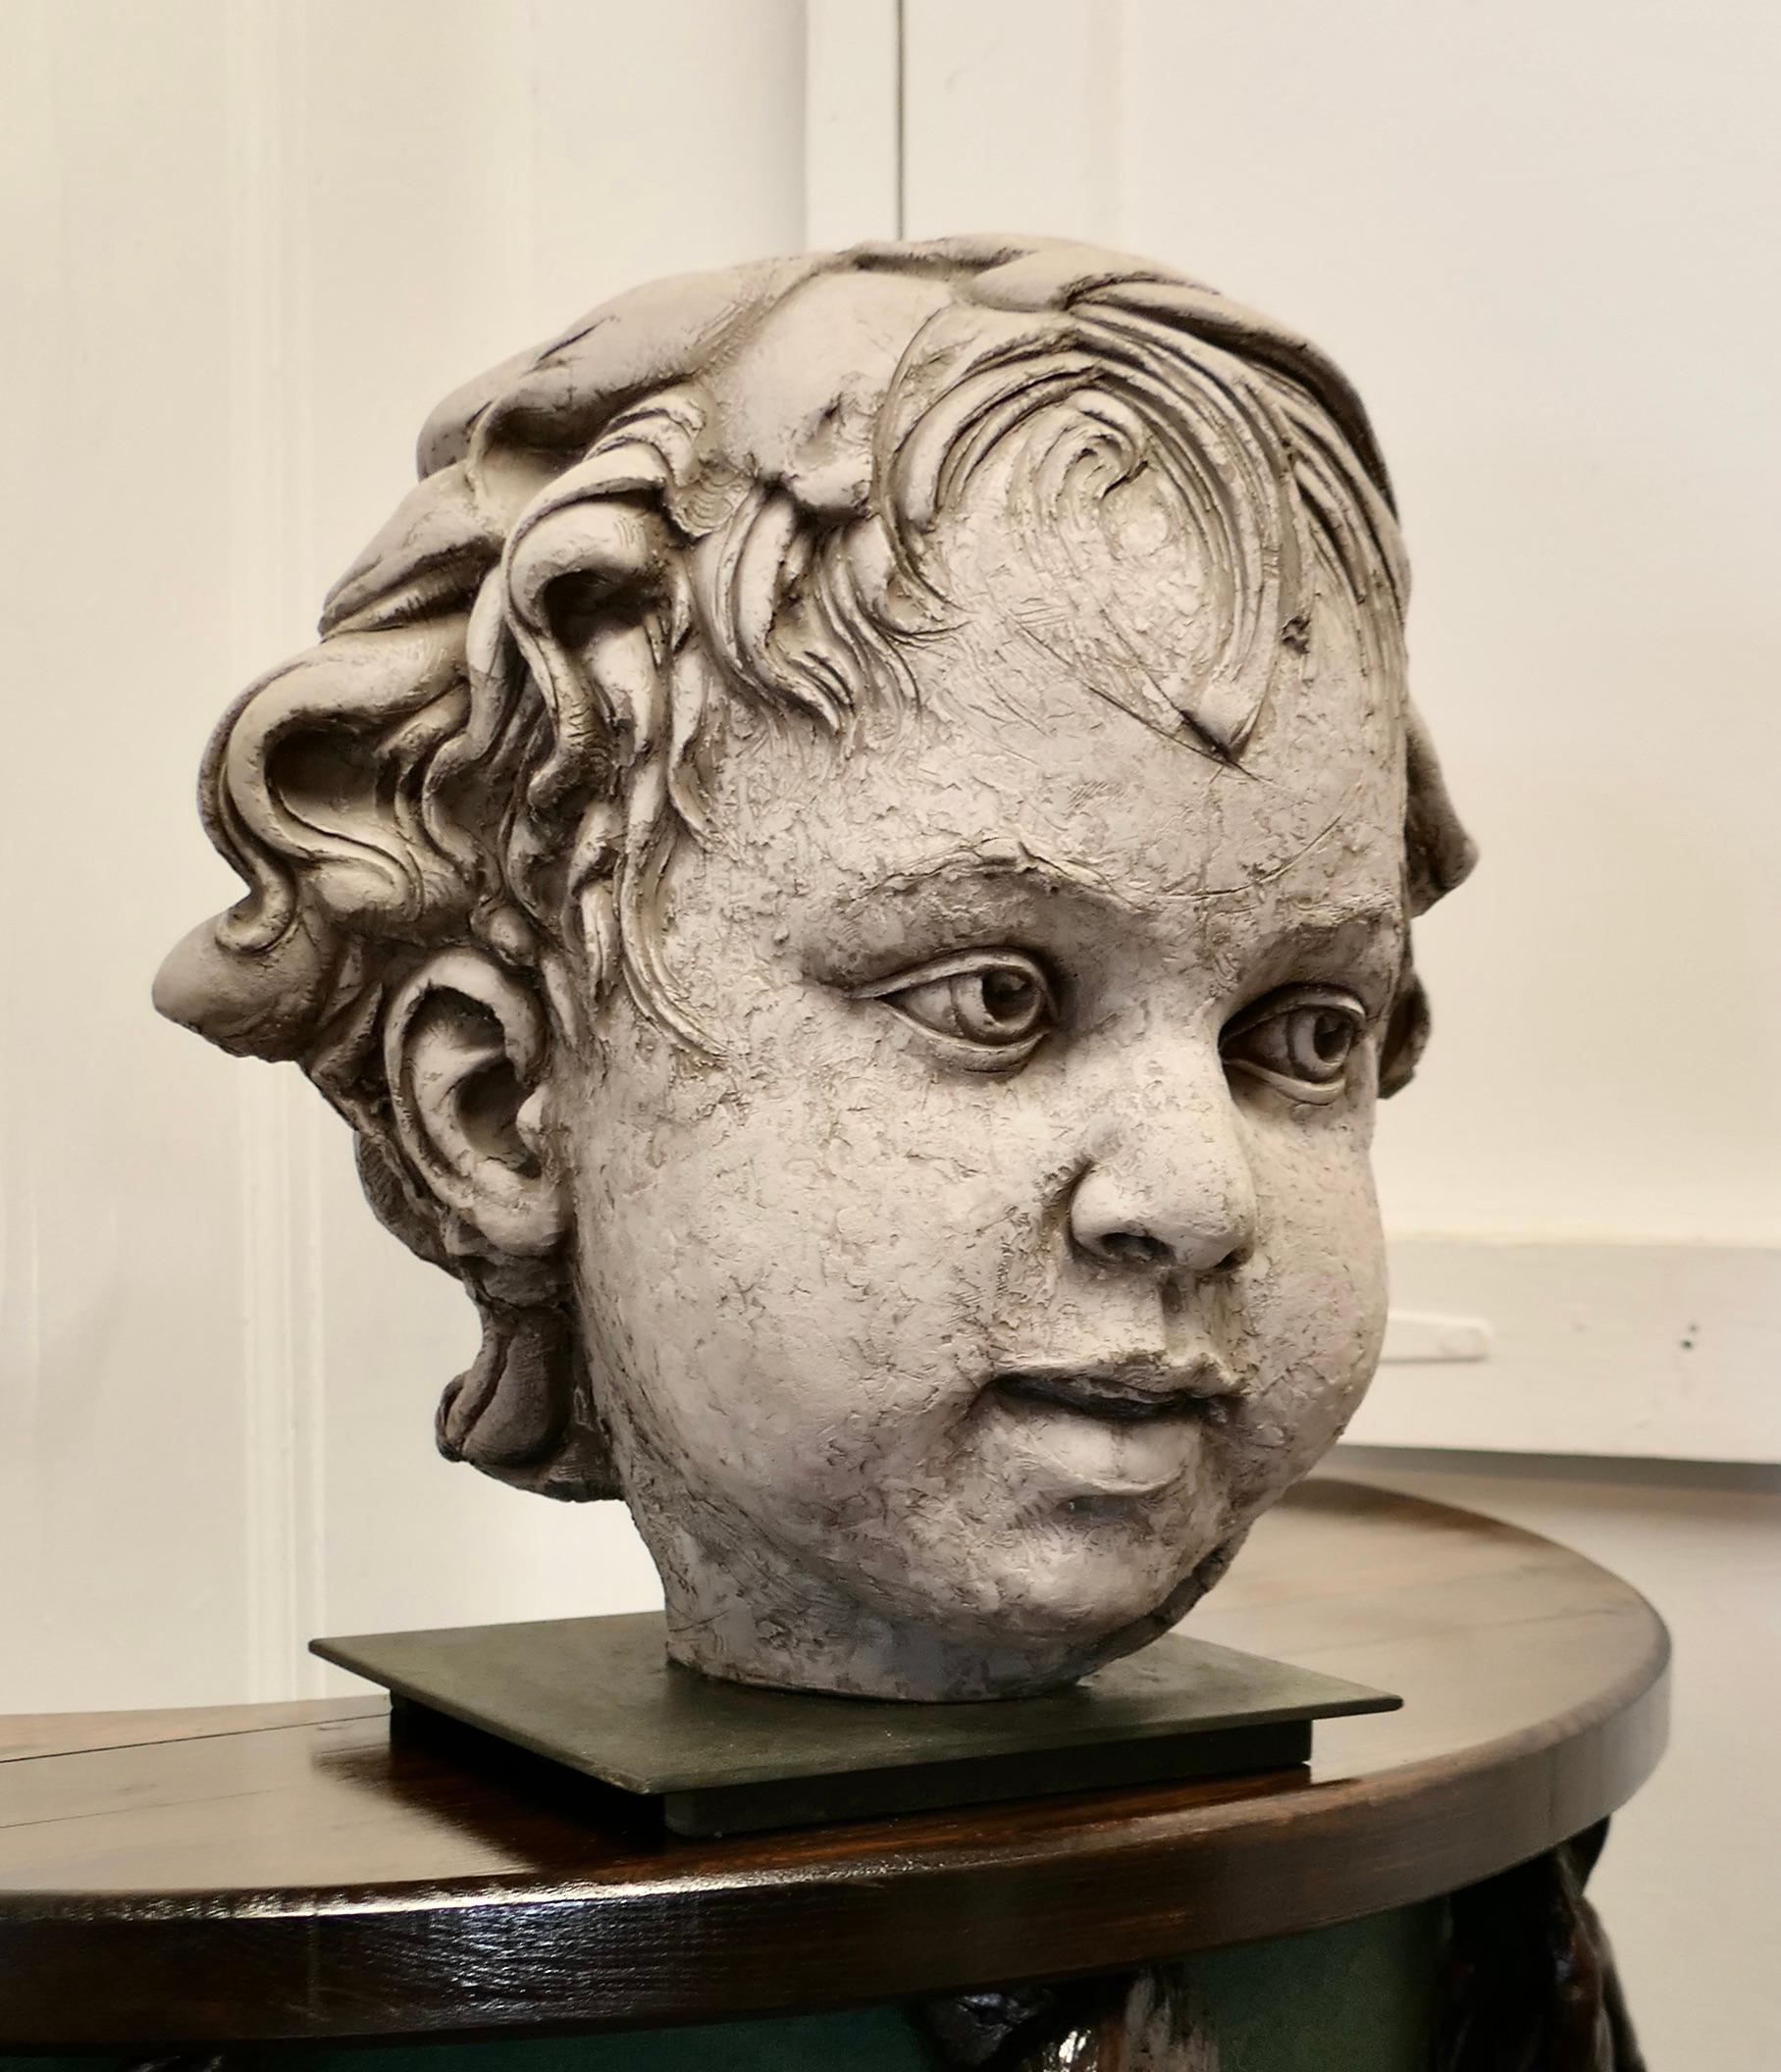 Large Clay Bust of a Child by Philippe Seené, 2004 set on Bronze  
 
Life size signed bust of a cherubic child, the bust is made in clay and is set into a bronze plinth, the signature on the back is “Ph Seené, 2004”
This piece was found in Brittany 